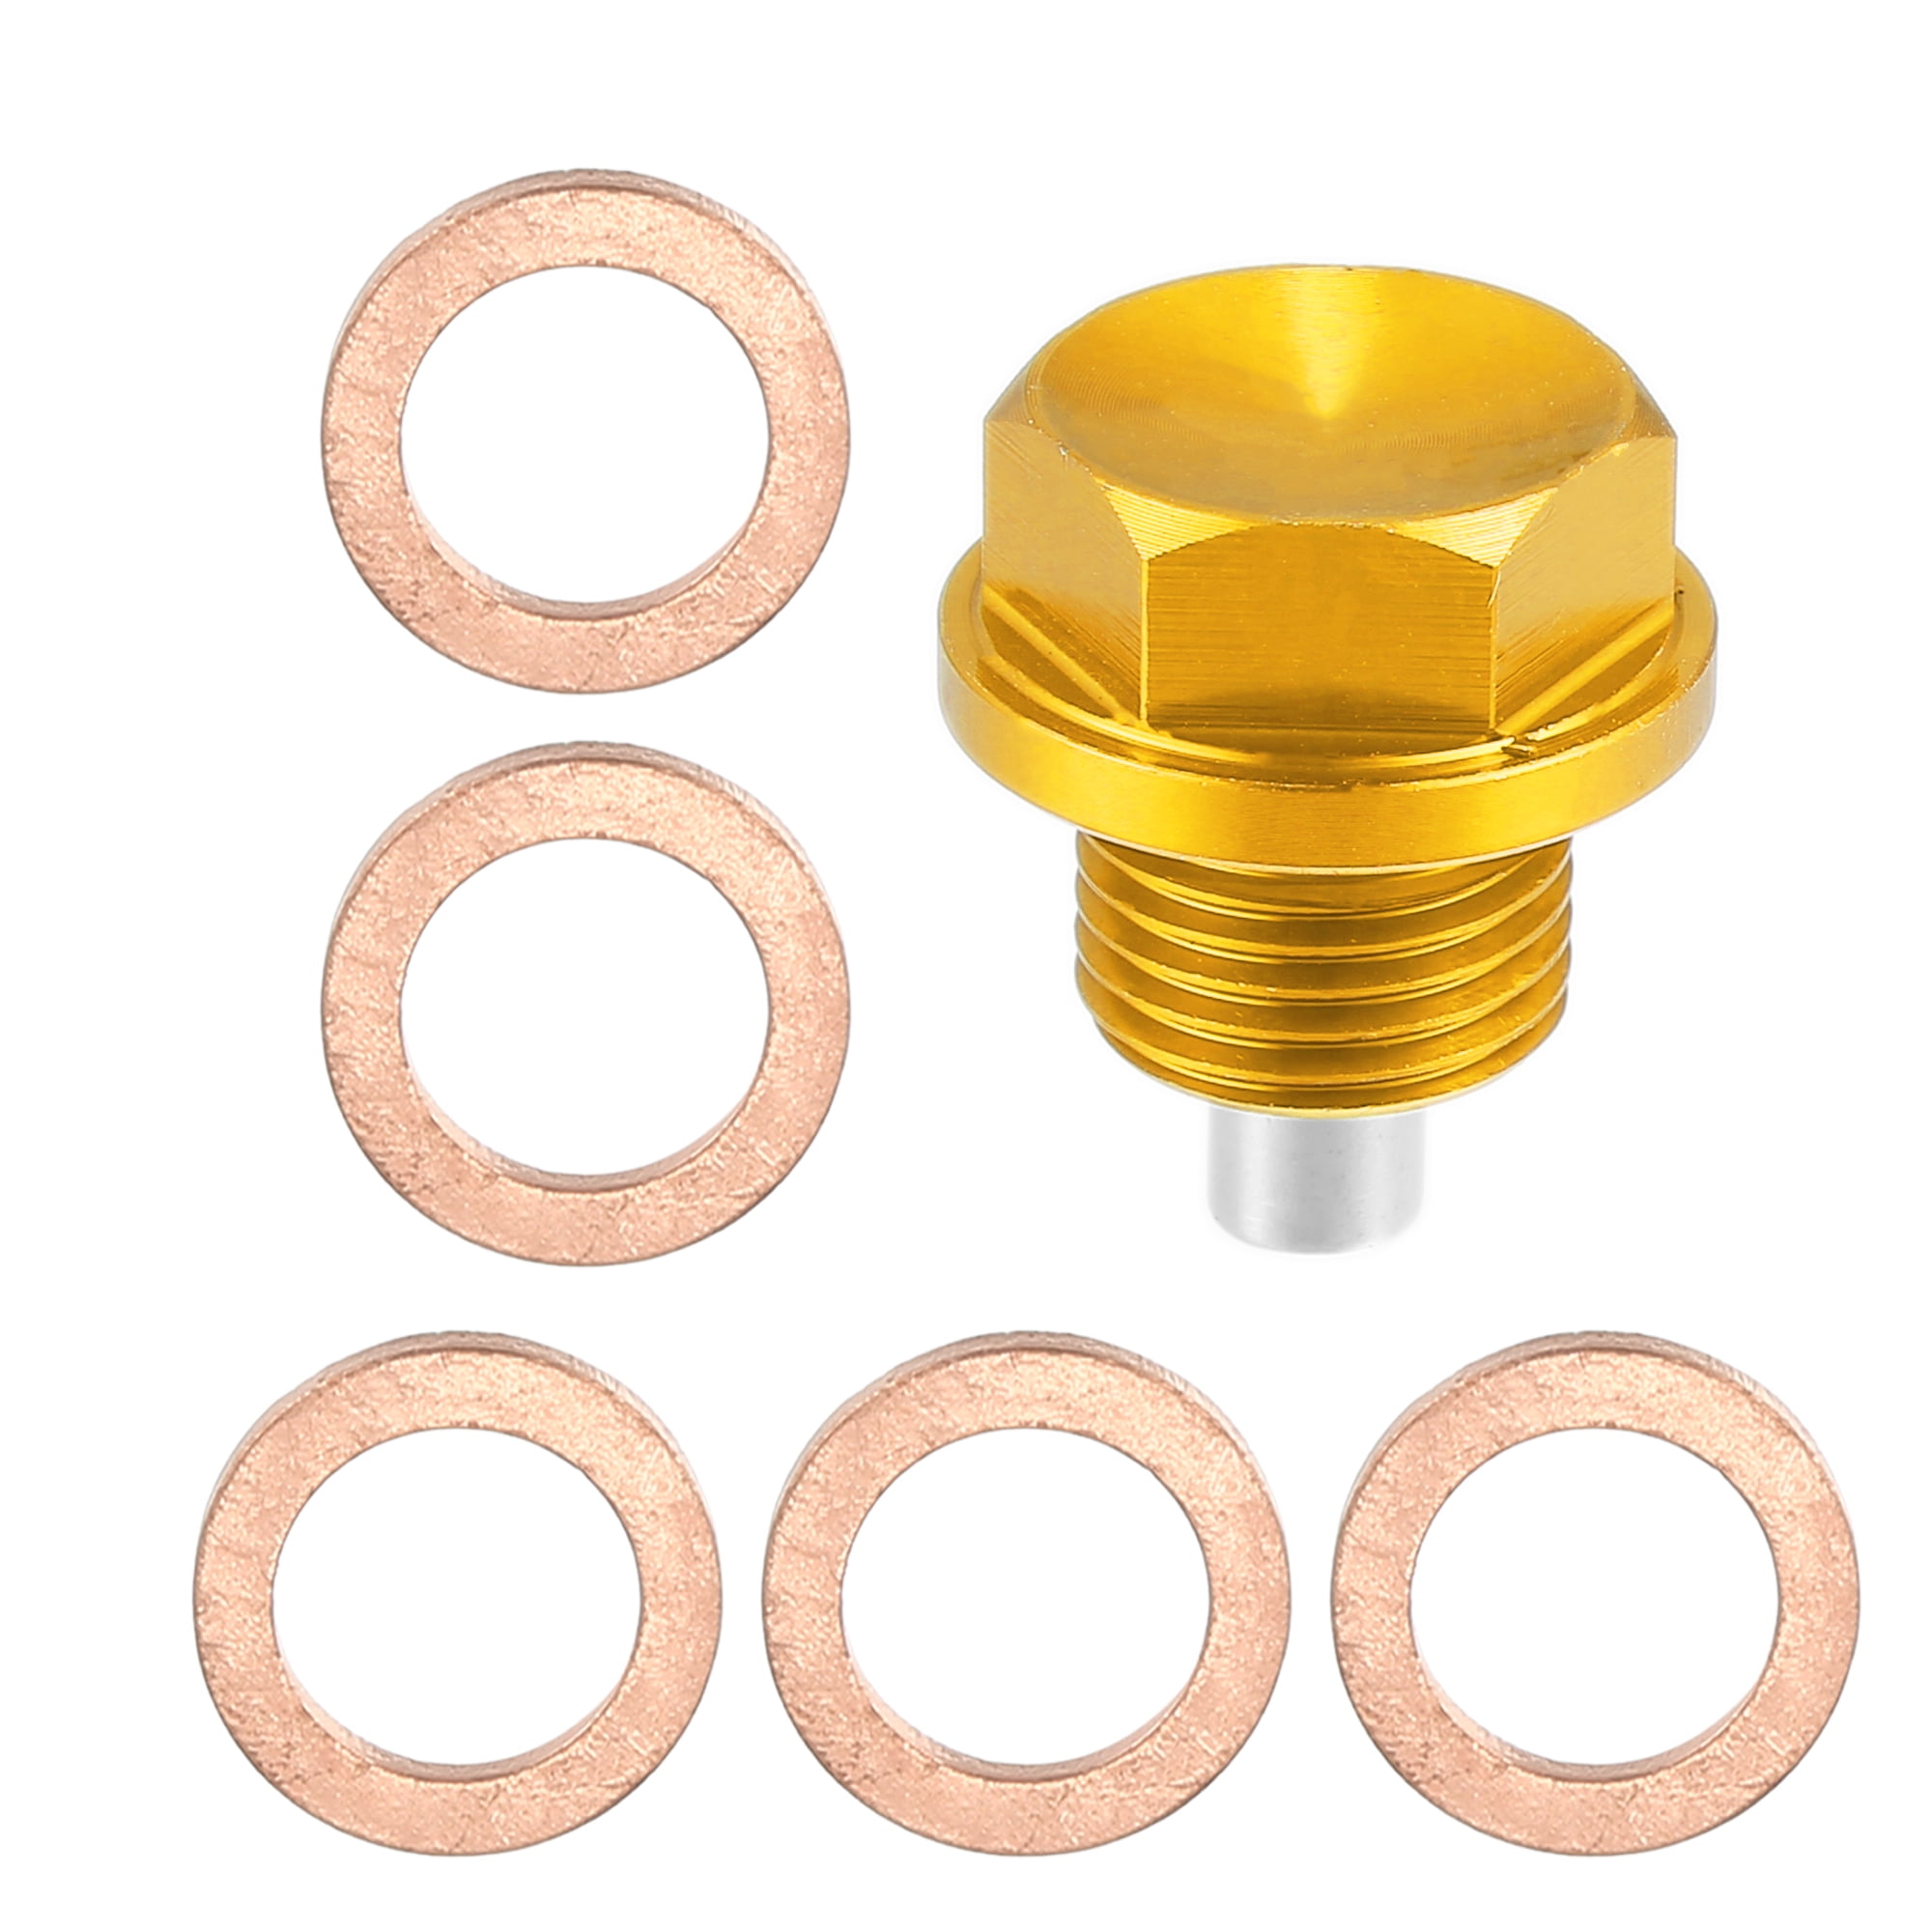 Unique Bargains Vehicle Engine Magnetic Oil Drain Plug M18x1.5 Stainless  Steel with Copper Washer 